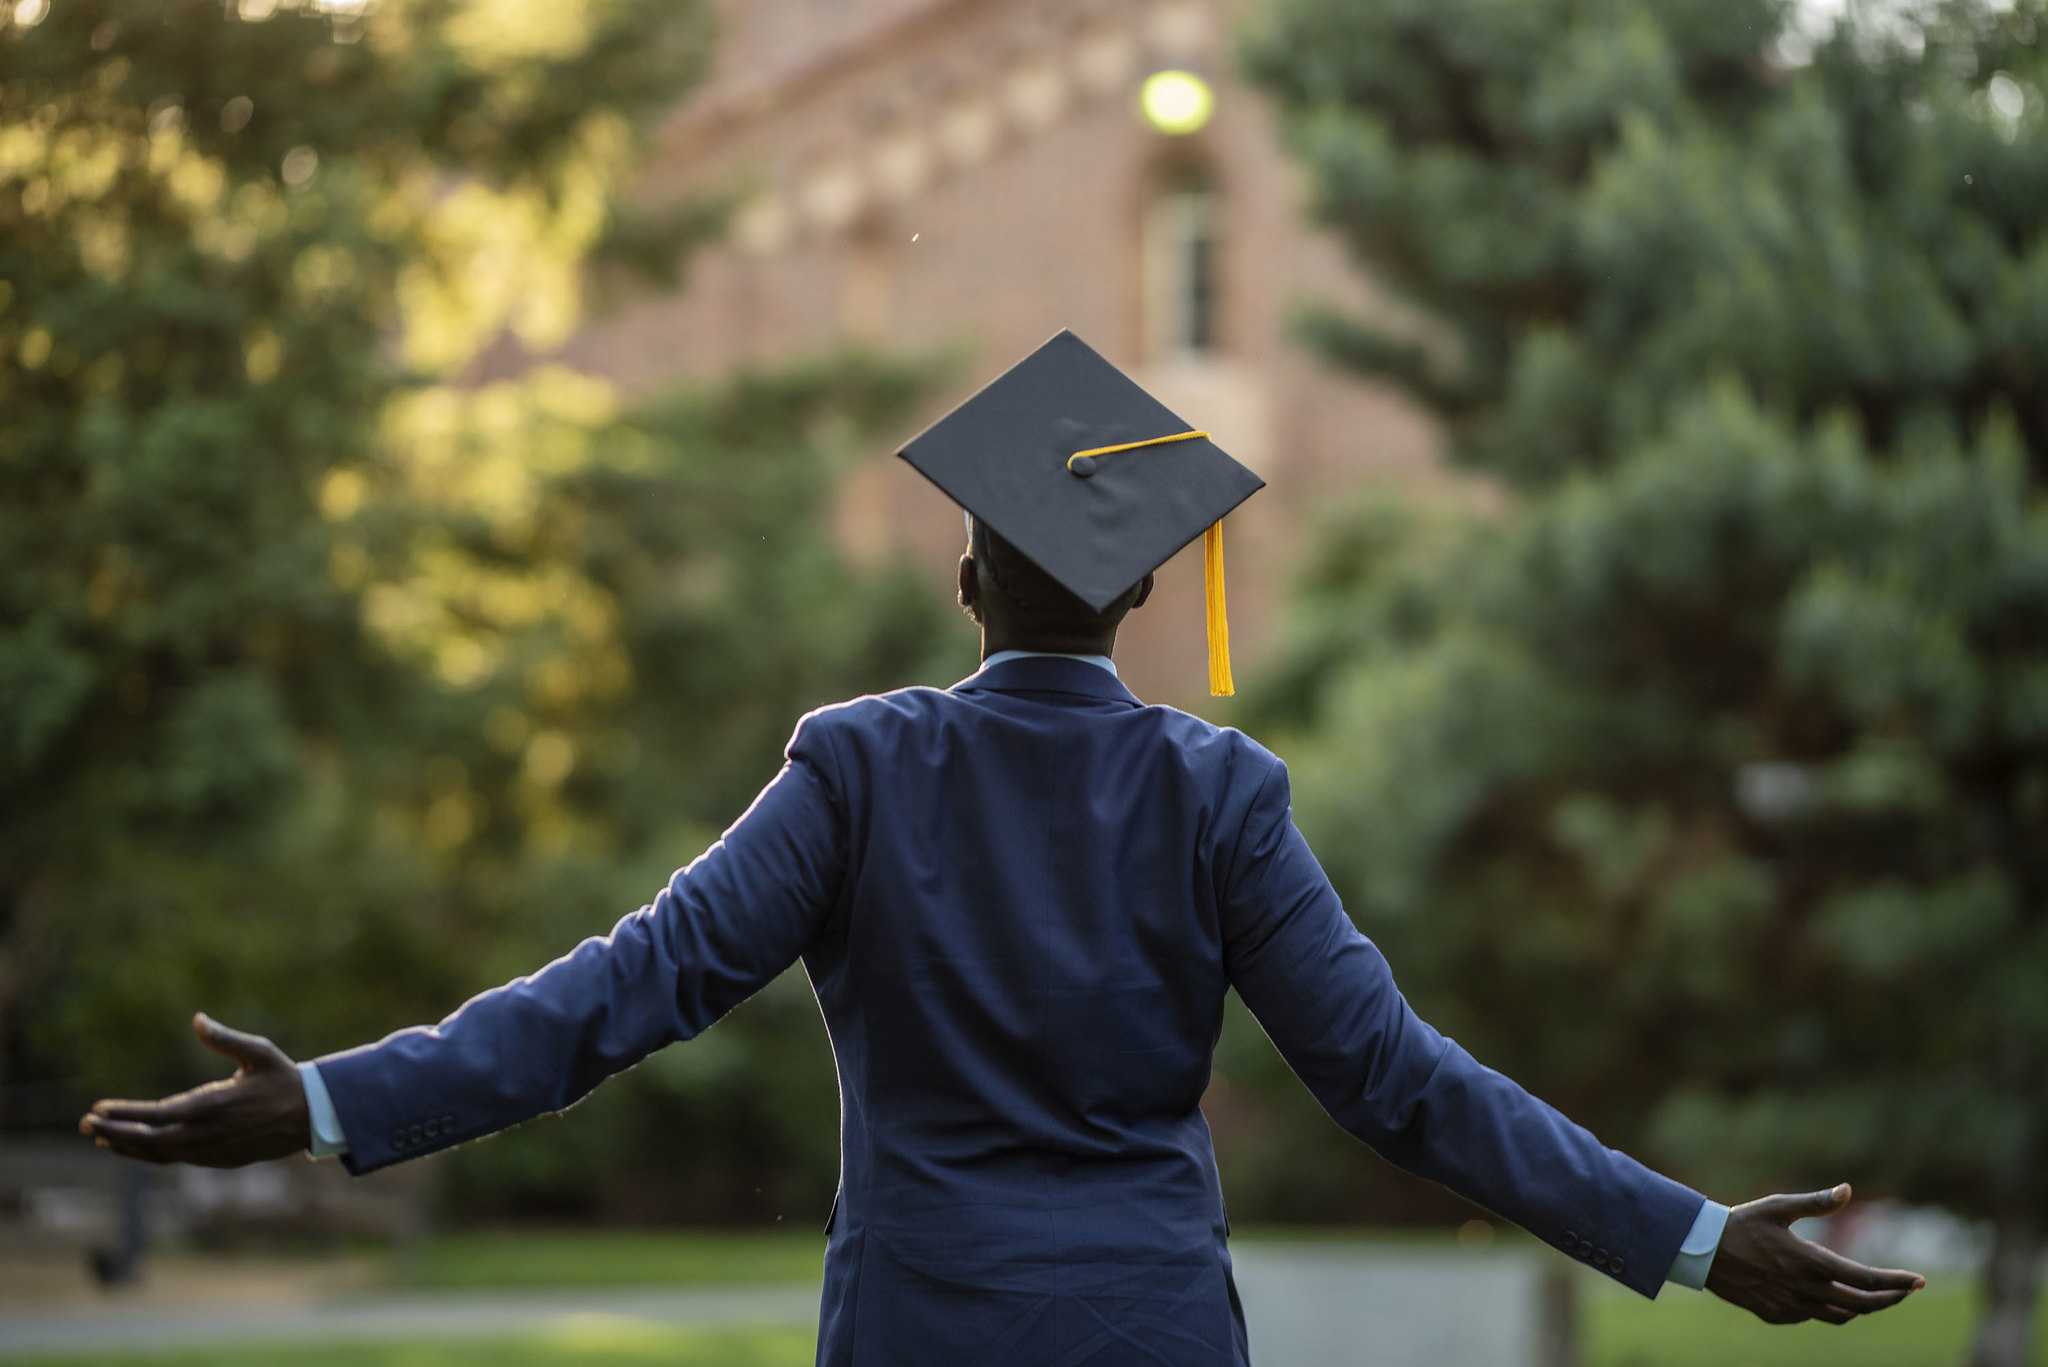 New graduate wearing mortar board hat extends his arms while facing away